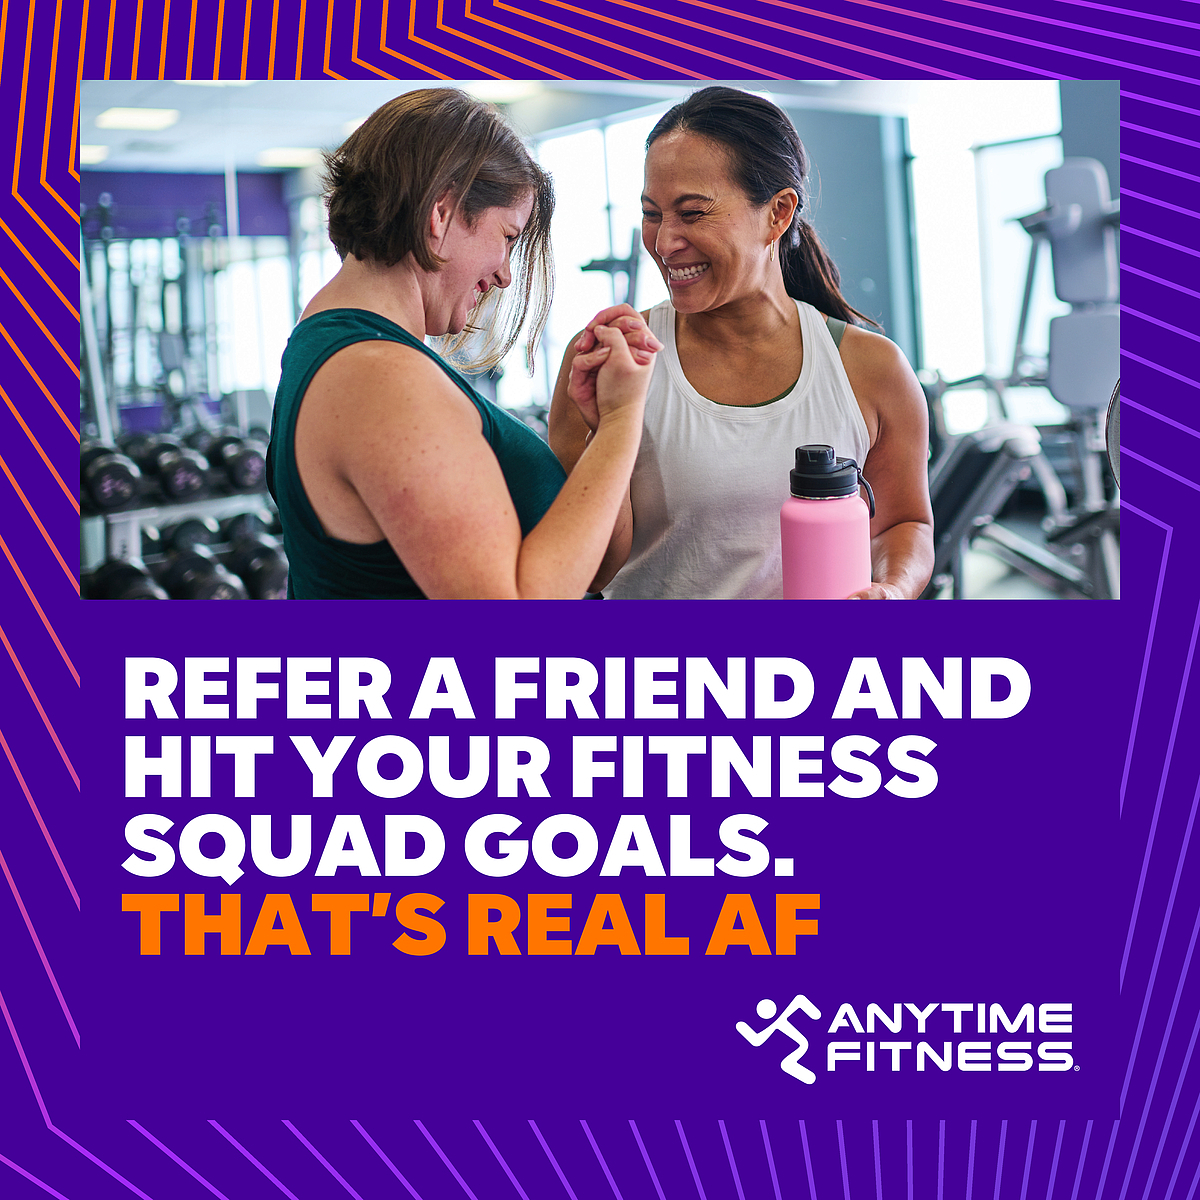 Need a workout buddy? They can come pick up a 7-day FREE trial! And if they sign up you get a free month of dues 😉

#afokotoks #okotoks #okotoksfitness #anytimefitness #okotokspersonaltrainer #okotoksbusiness #fitnessmotivation #trainertip #okotokssmallbusiness...